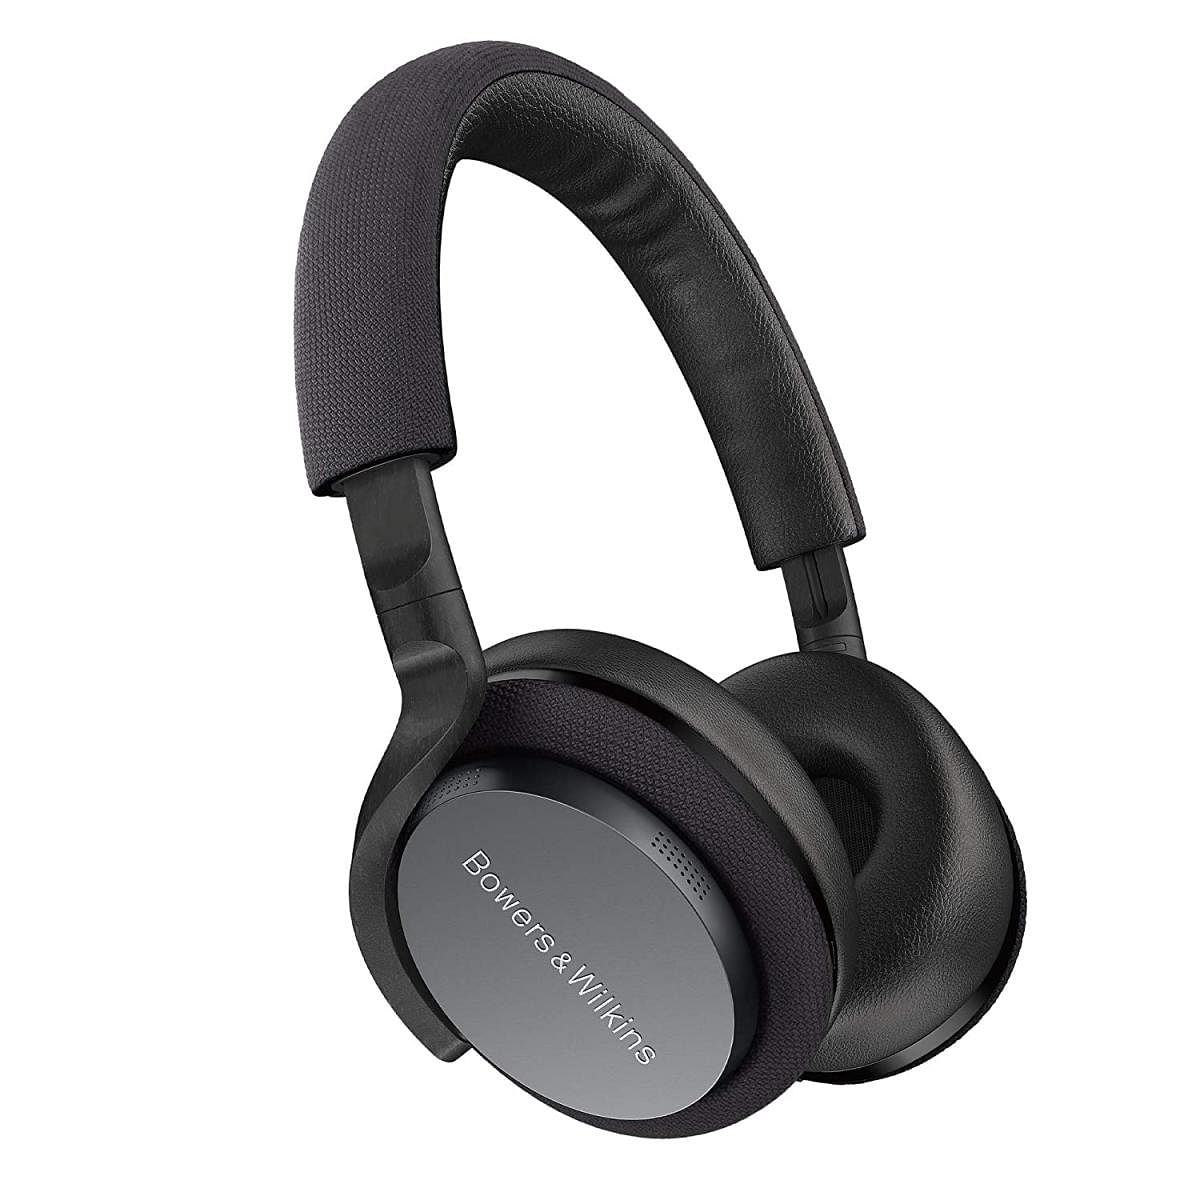 Bowers and Wilkins PX5 headphones